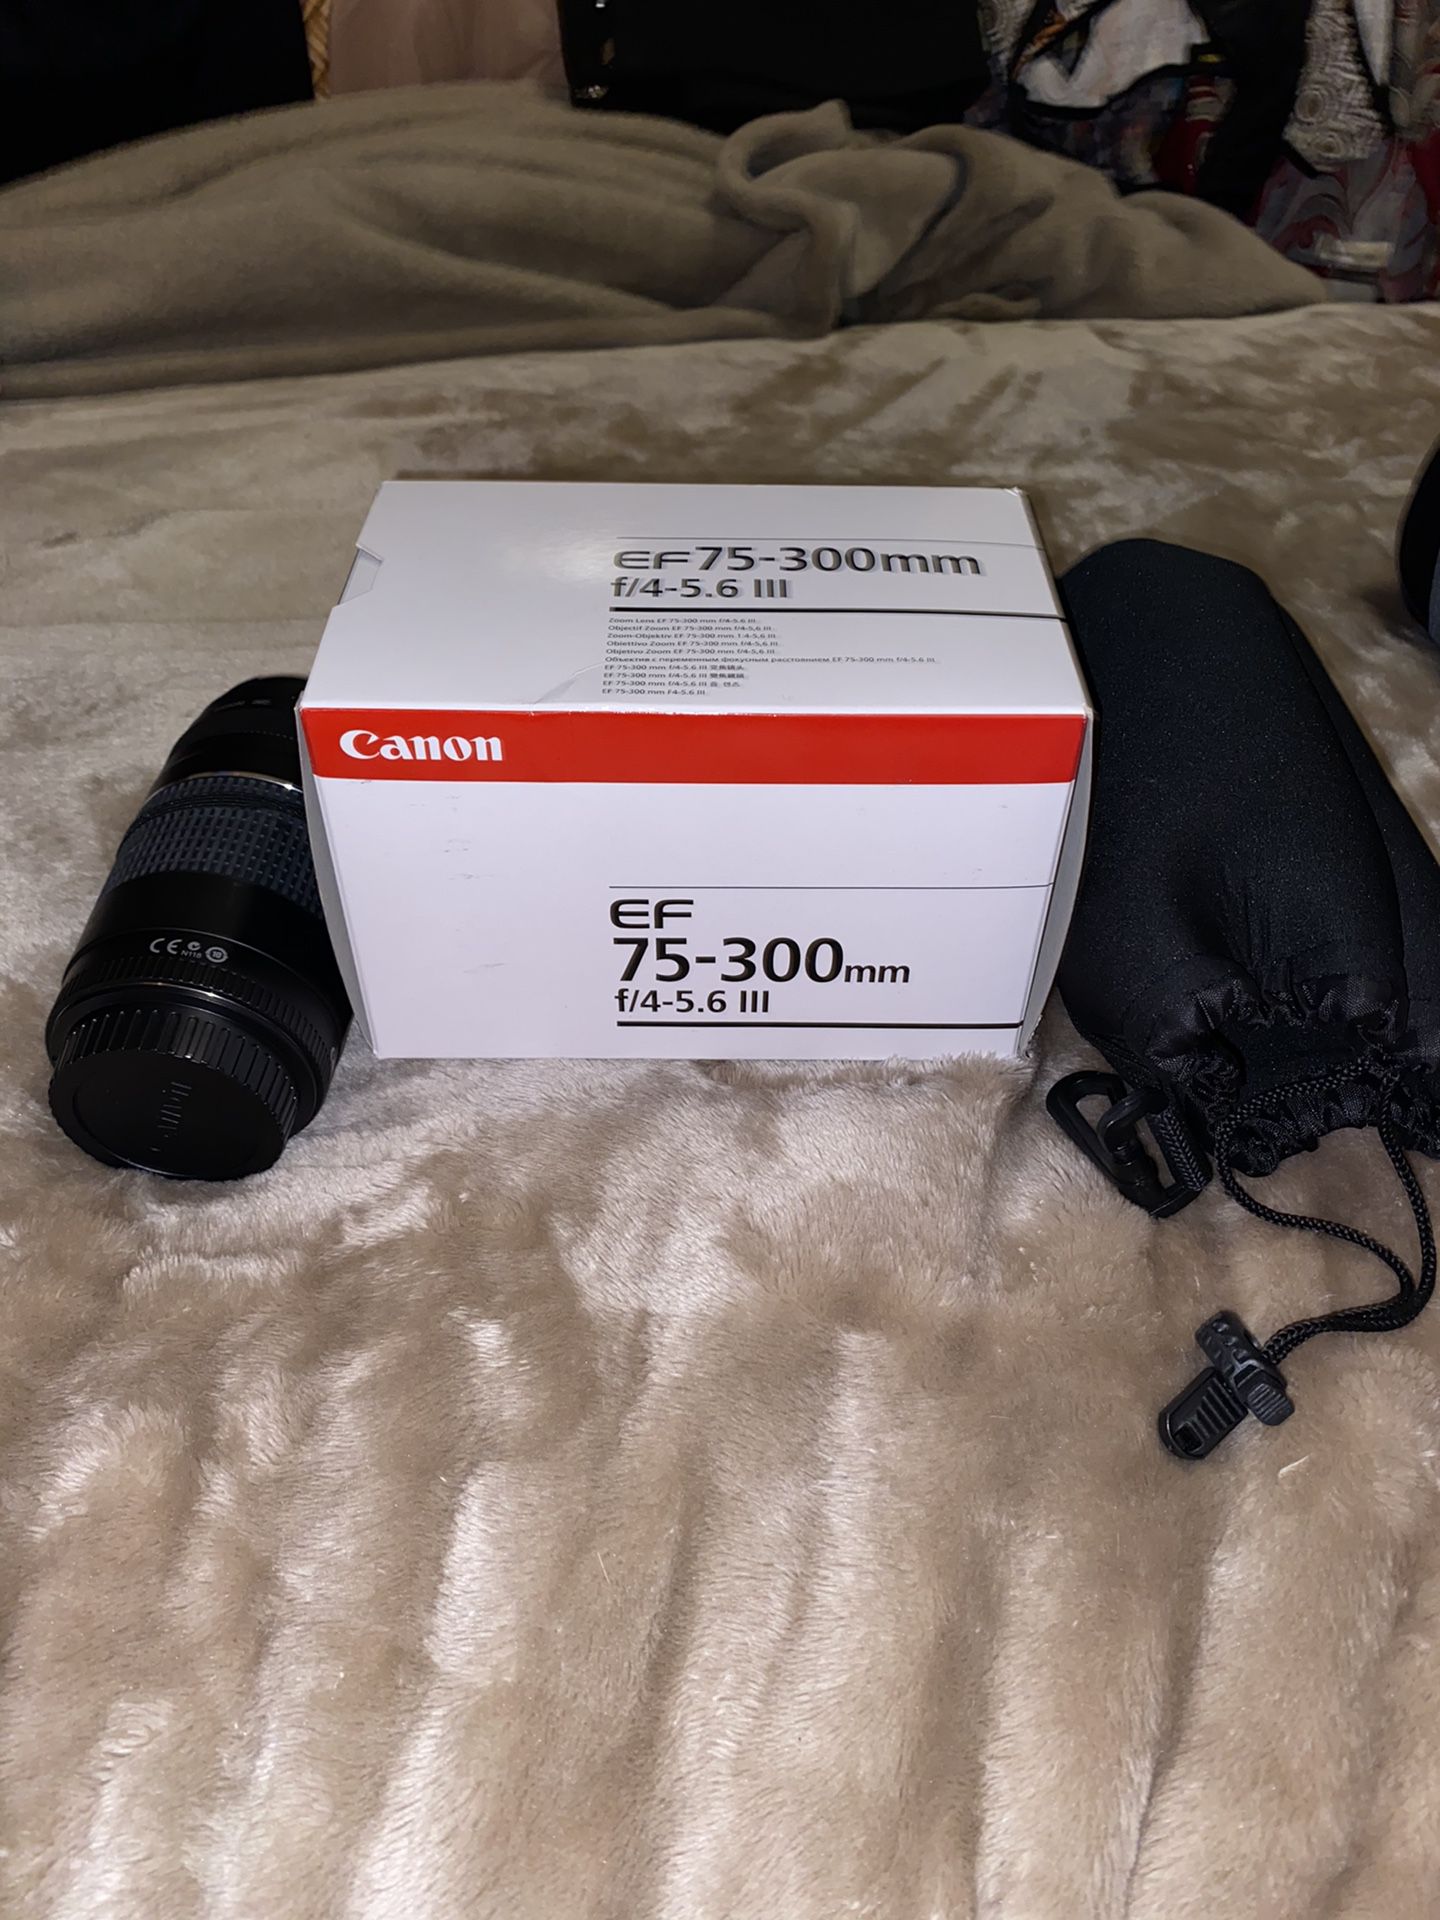 Sale OfferUp Zoom in Cameras - Canon SLR for f/4-5.6 for EF 75-300mm Canon Telephoto III FL Plantation, Lens